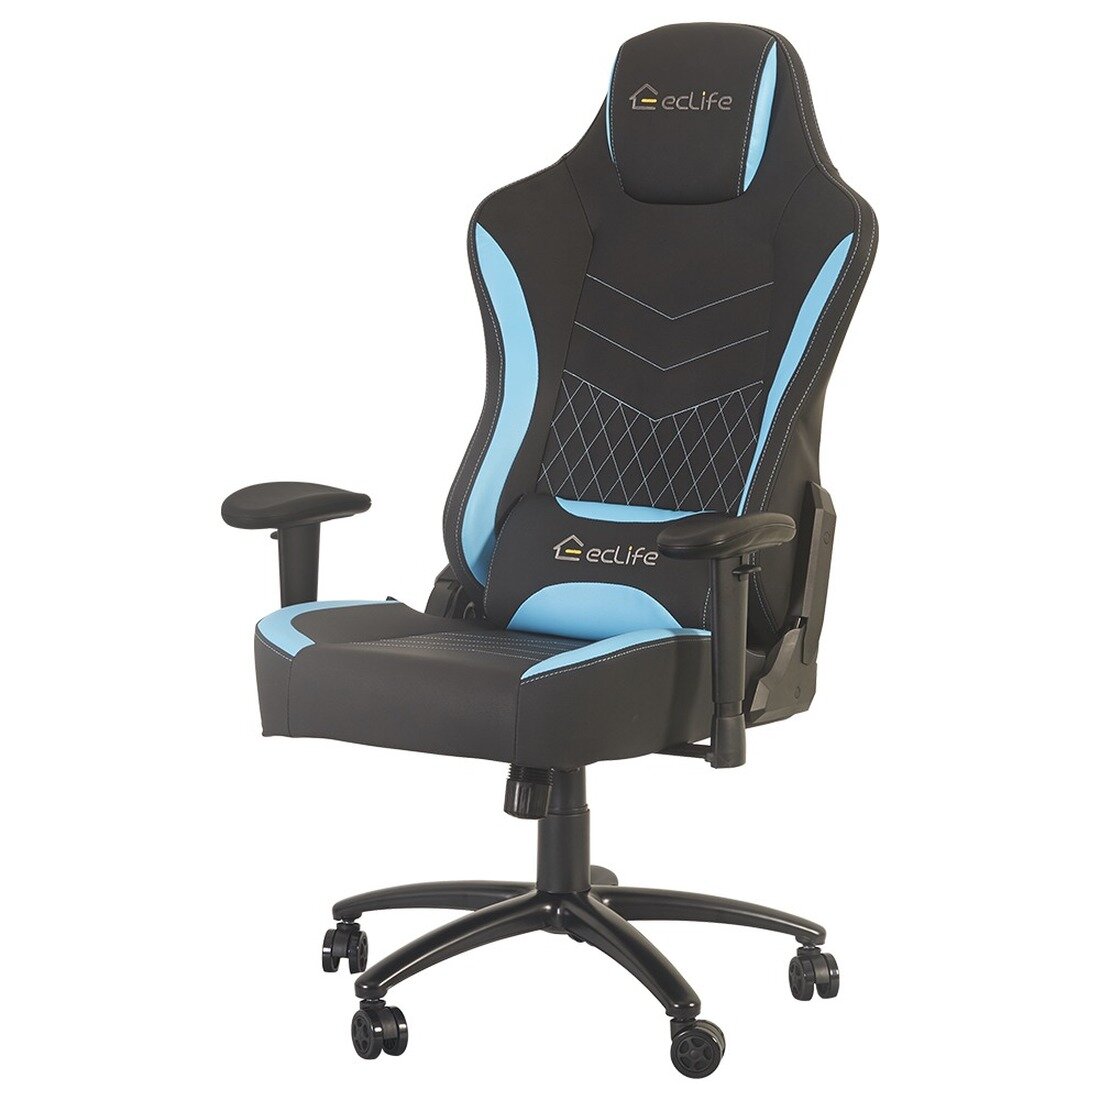 Details about   Racing Gaming Chair Home Office Swivel Computer Desk Armchair Ergonomic Cushion 